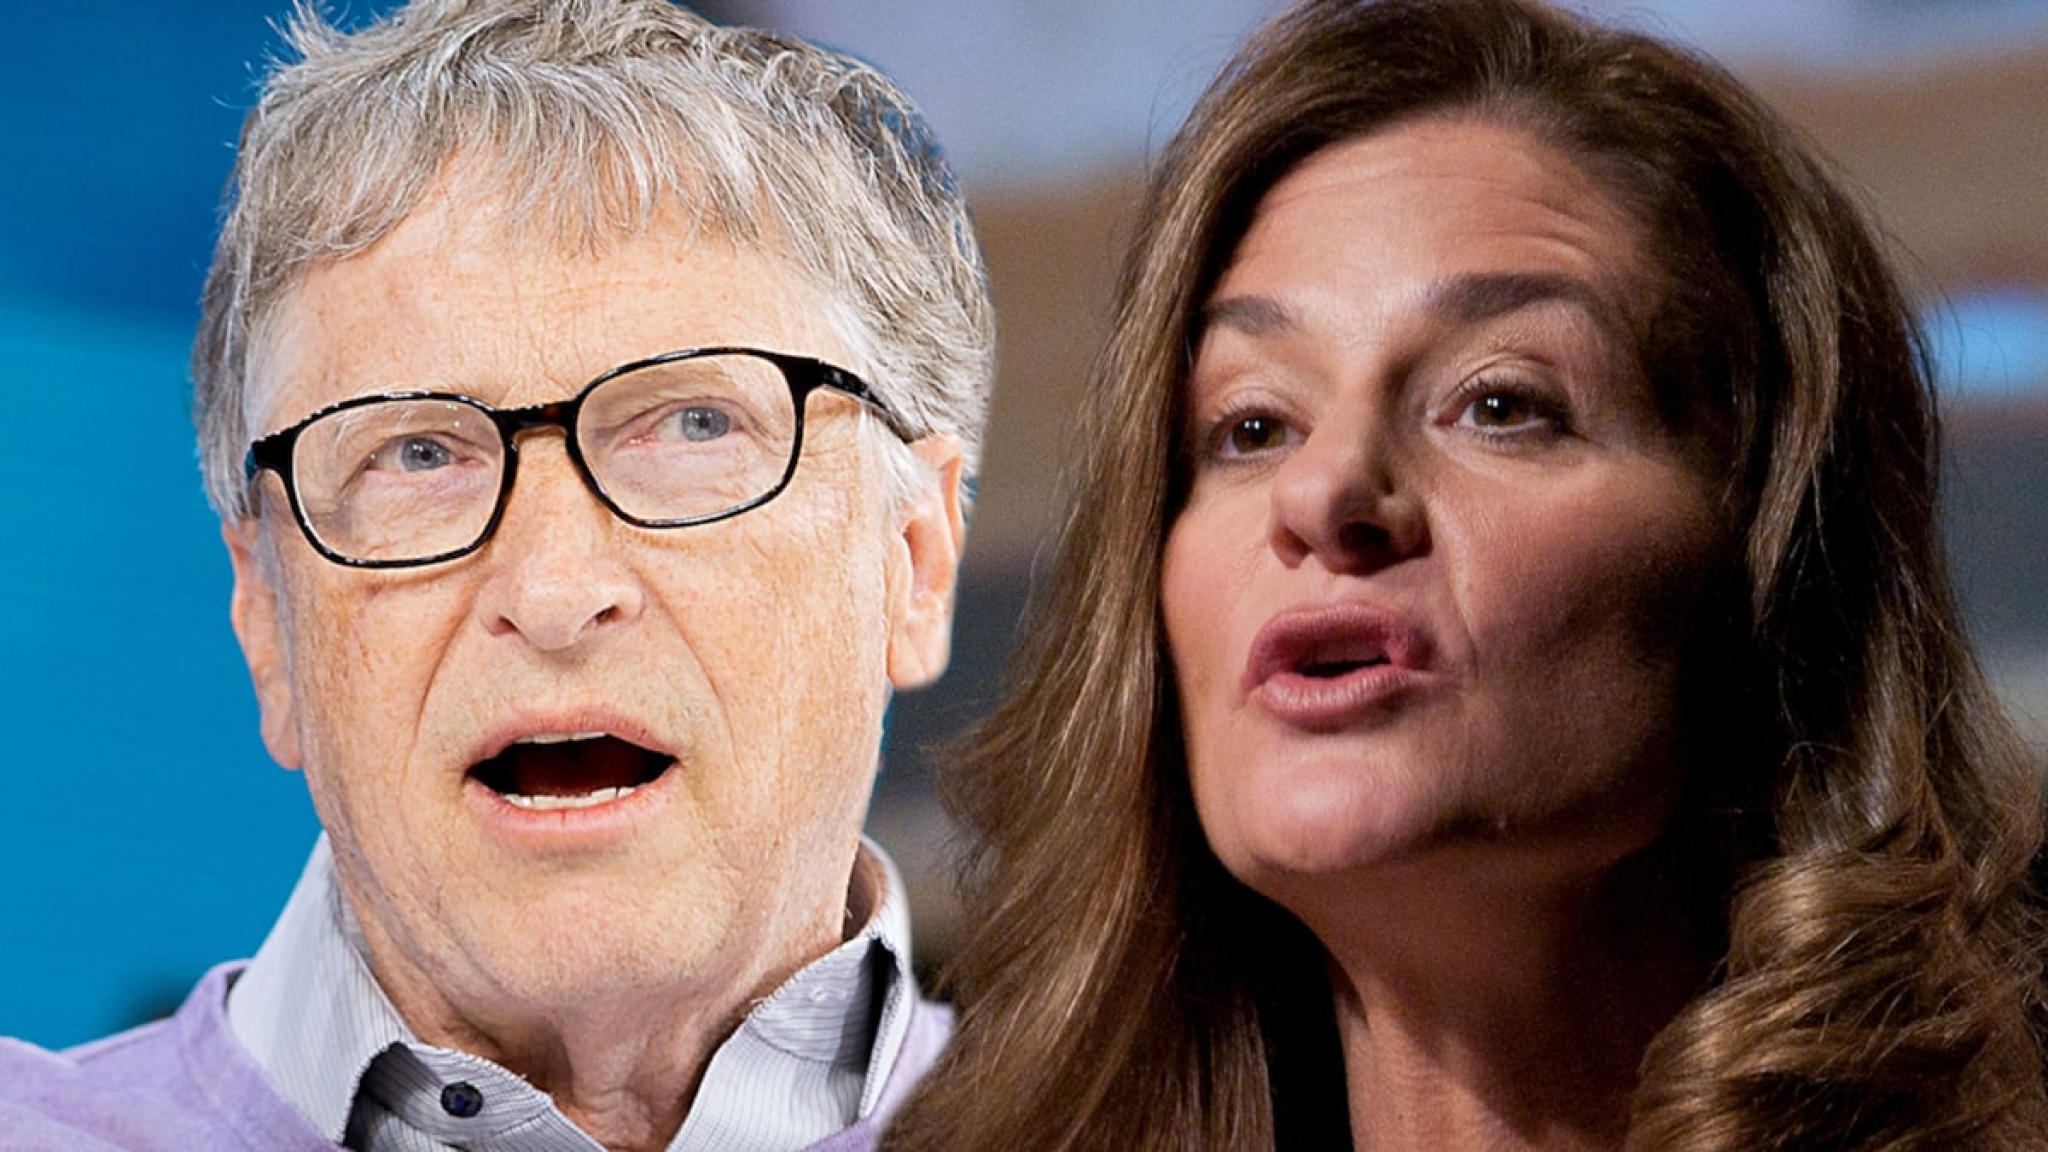 Bill Gates Drew Anger of Family During Secret Island Trip Ahead of Divorce